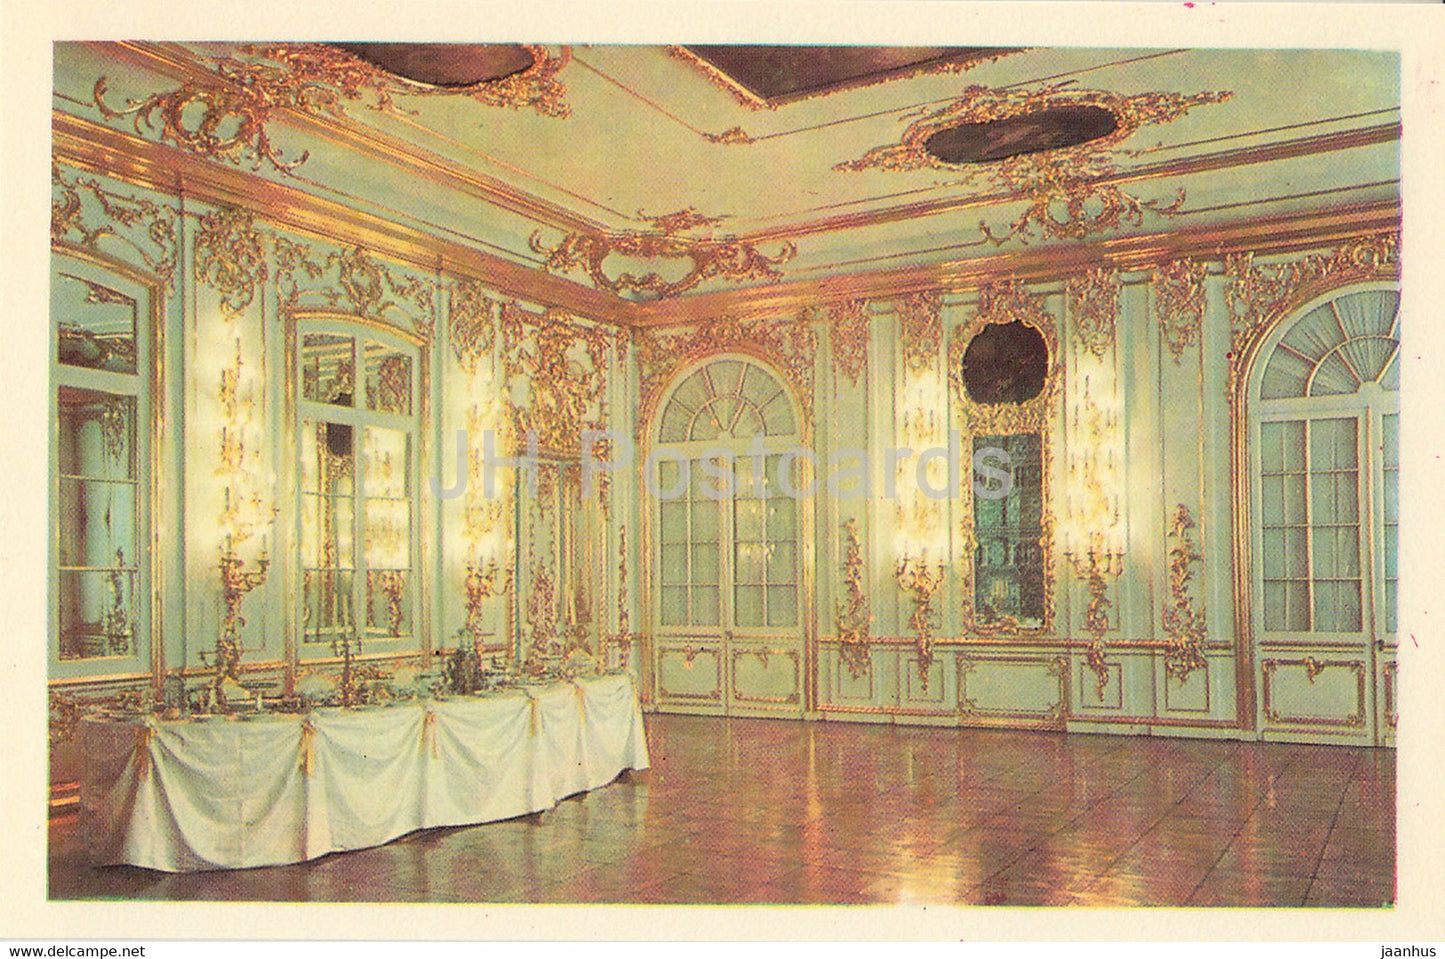 Town of Pushkin - Great (Yekaterinsky) Palace - Noblemen's Dining Room - 1971 - Russia USSR - unused - JH Postcards